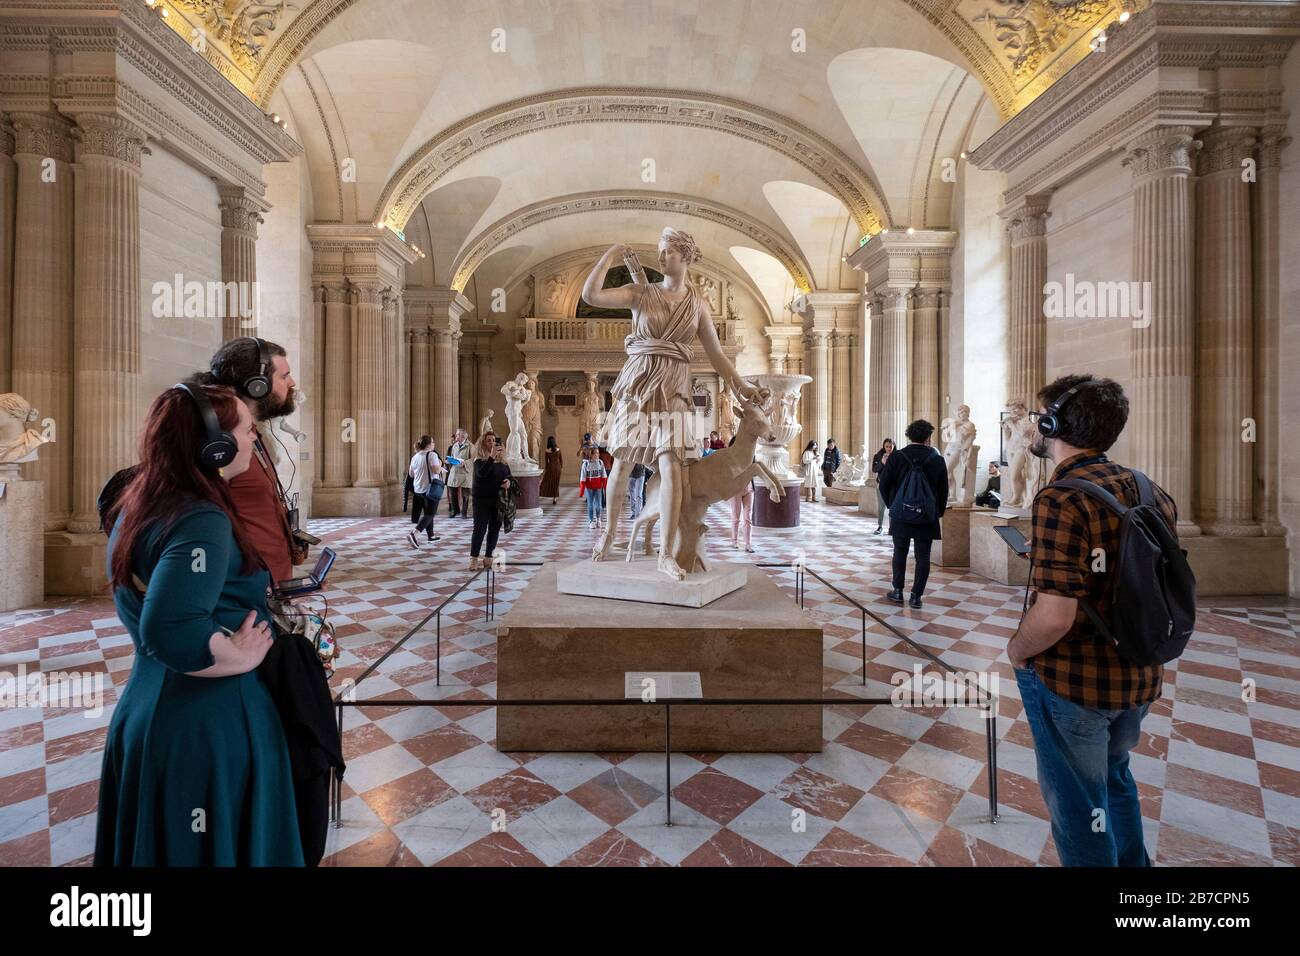 Statue of Artemis with a Doe at the Louvre Museum in Paris, France, Europe Stock Photo